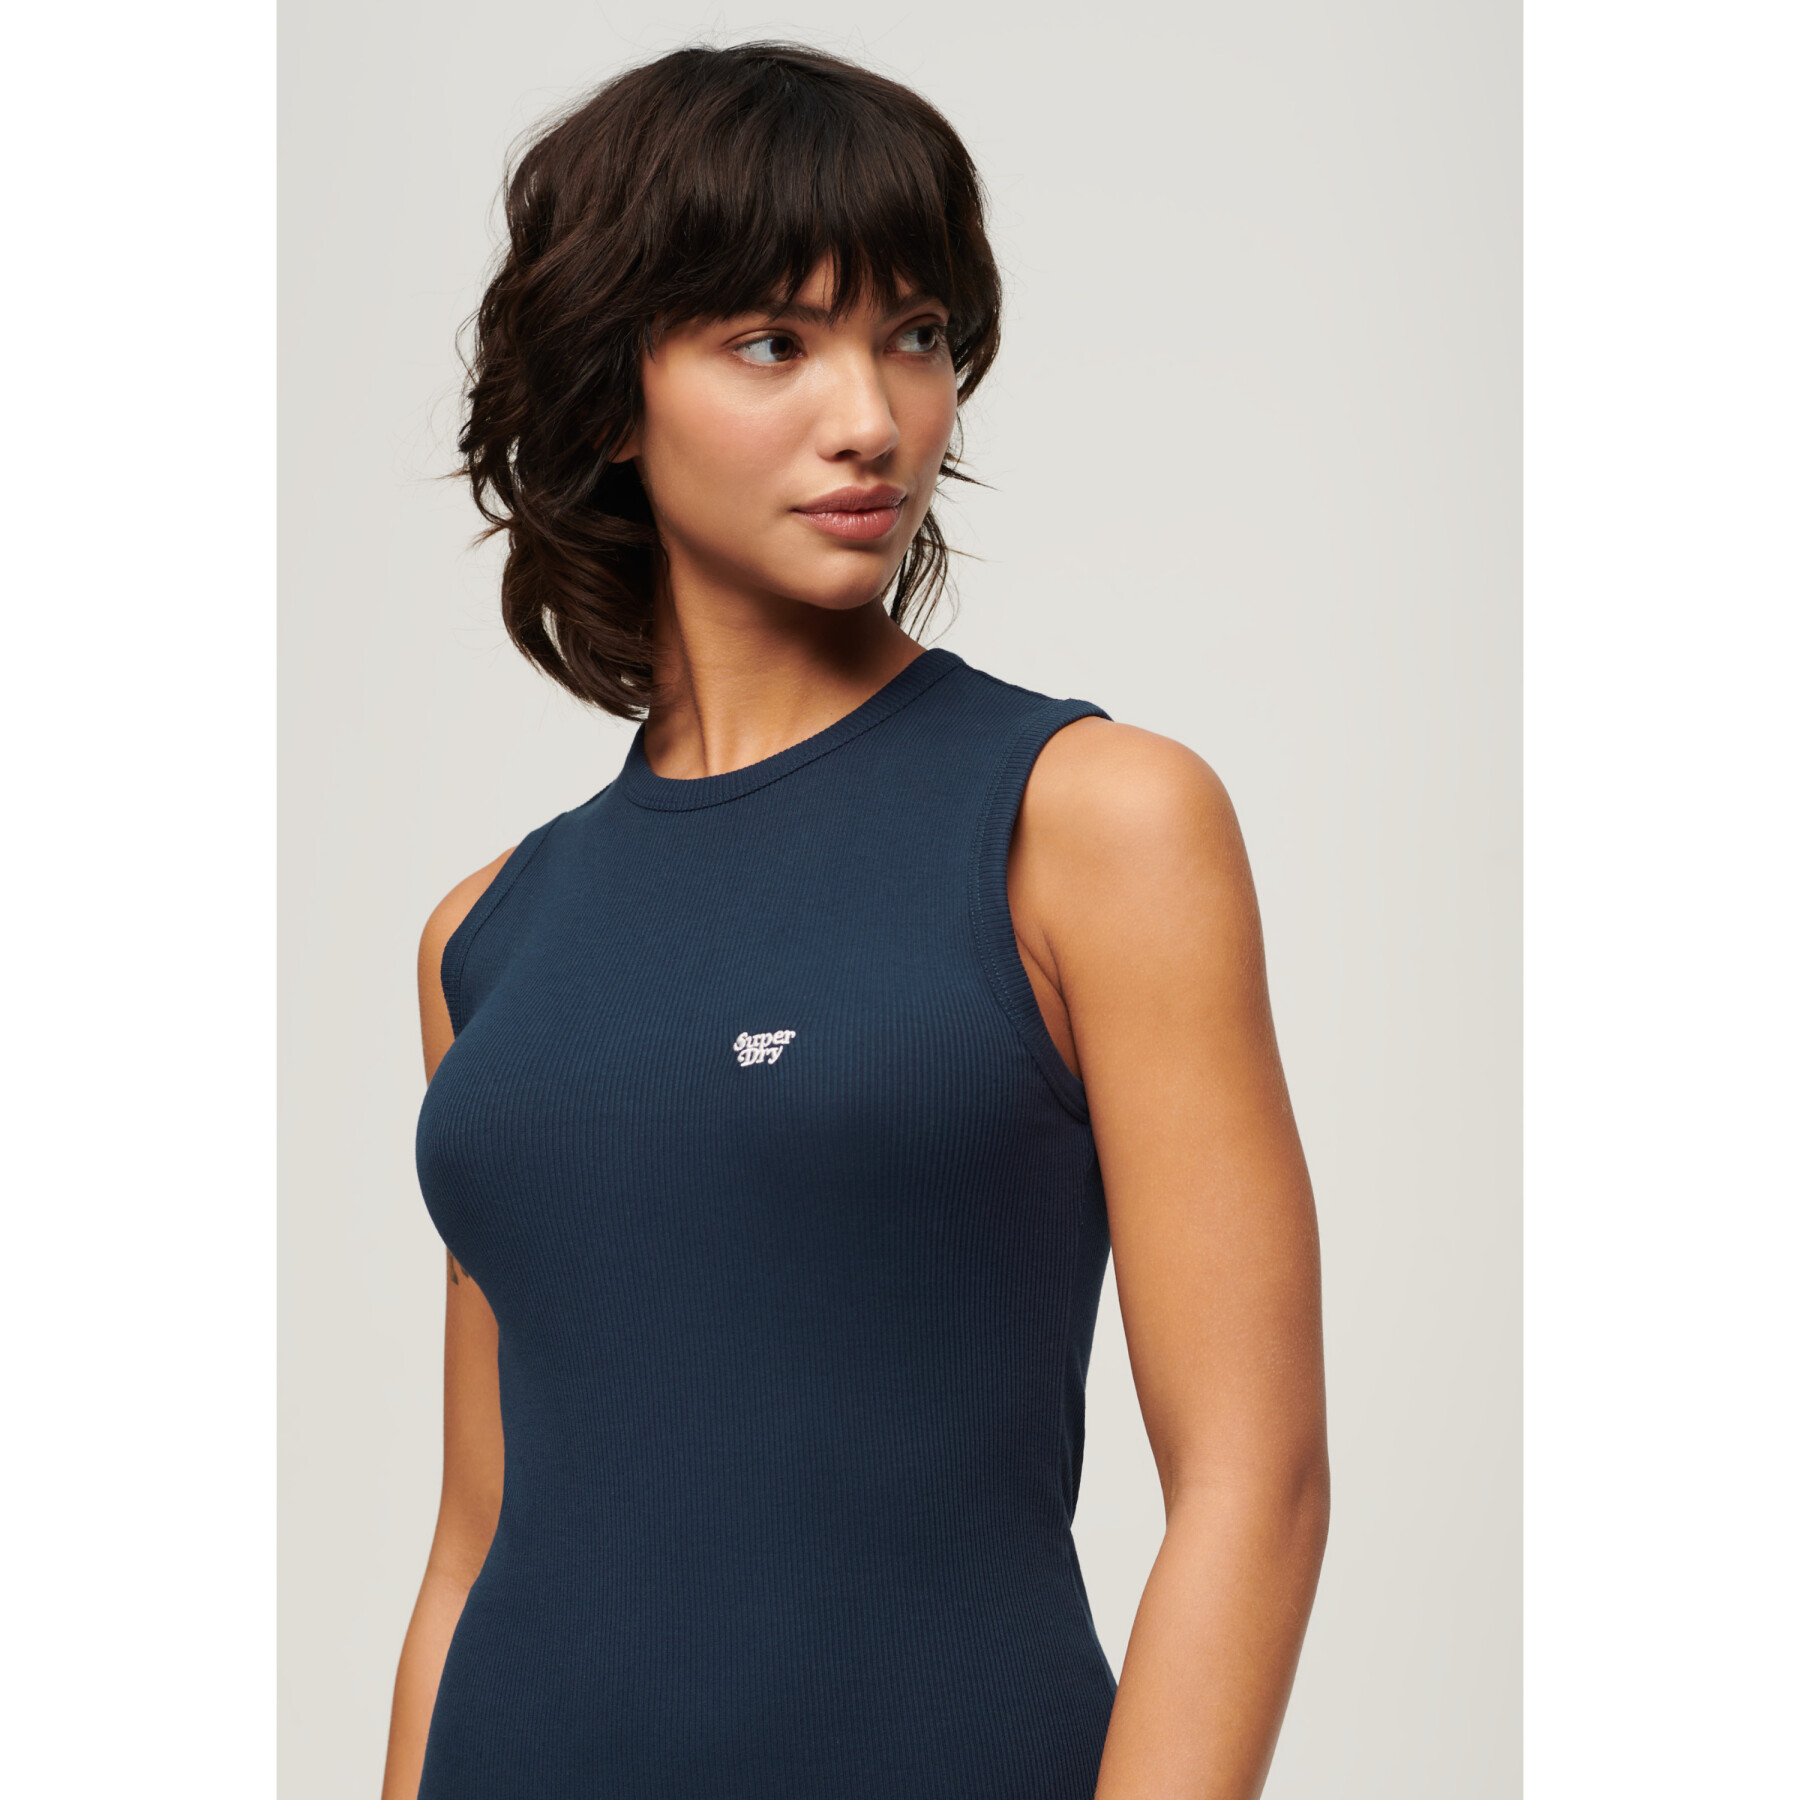 Women's mid-length ribbed dress Superdry